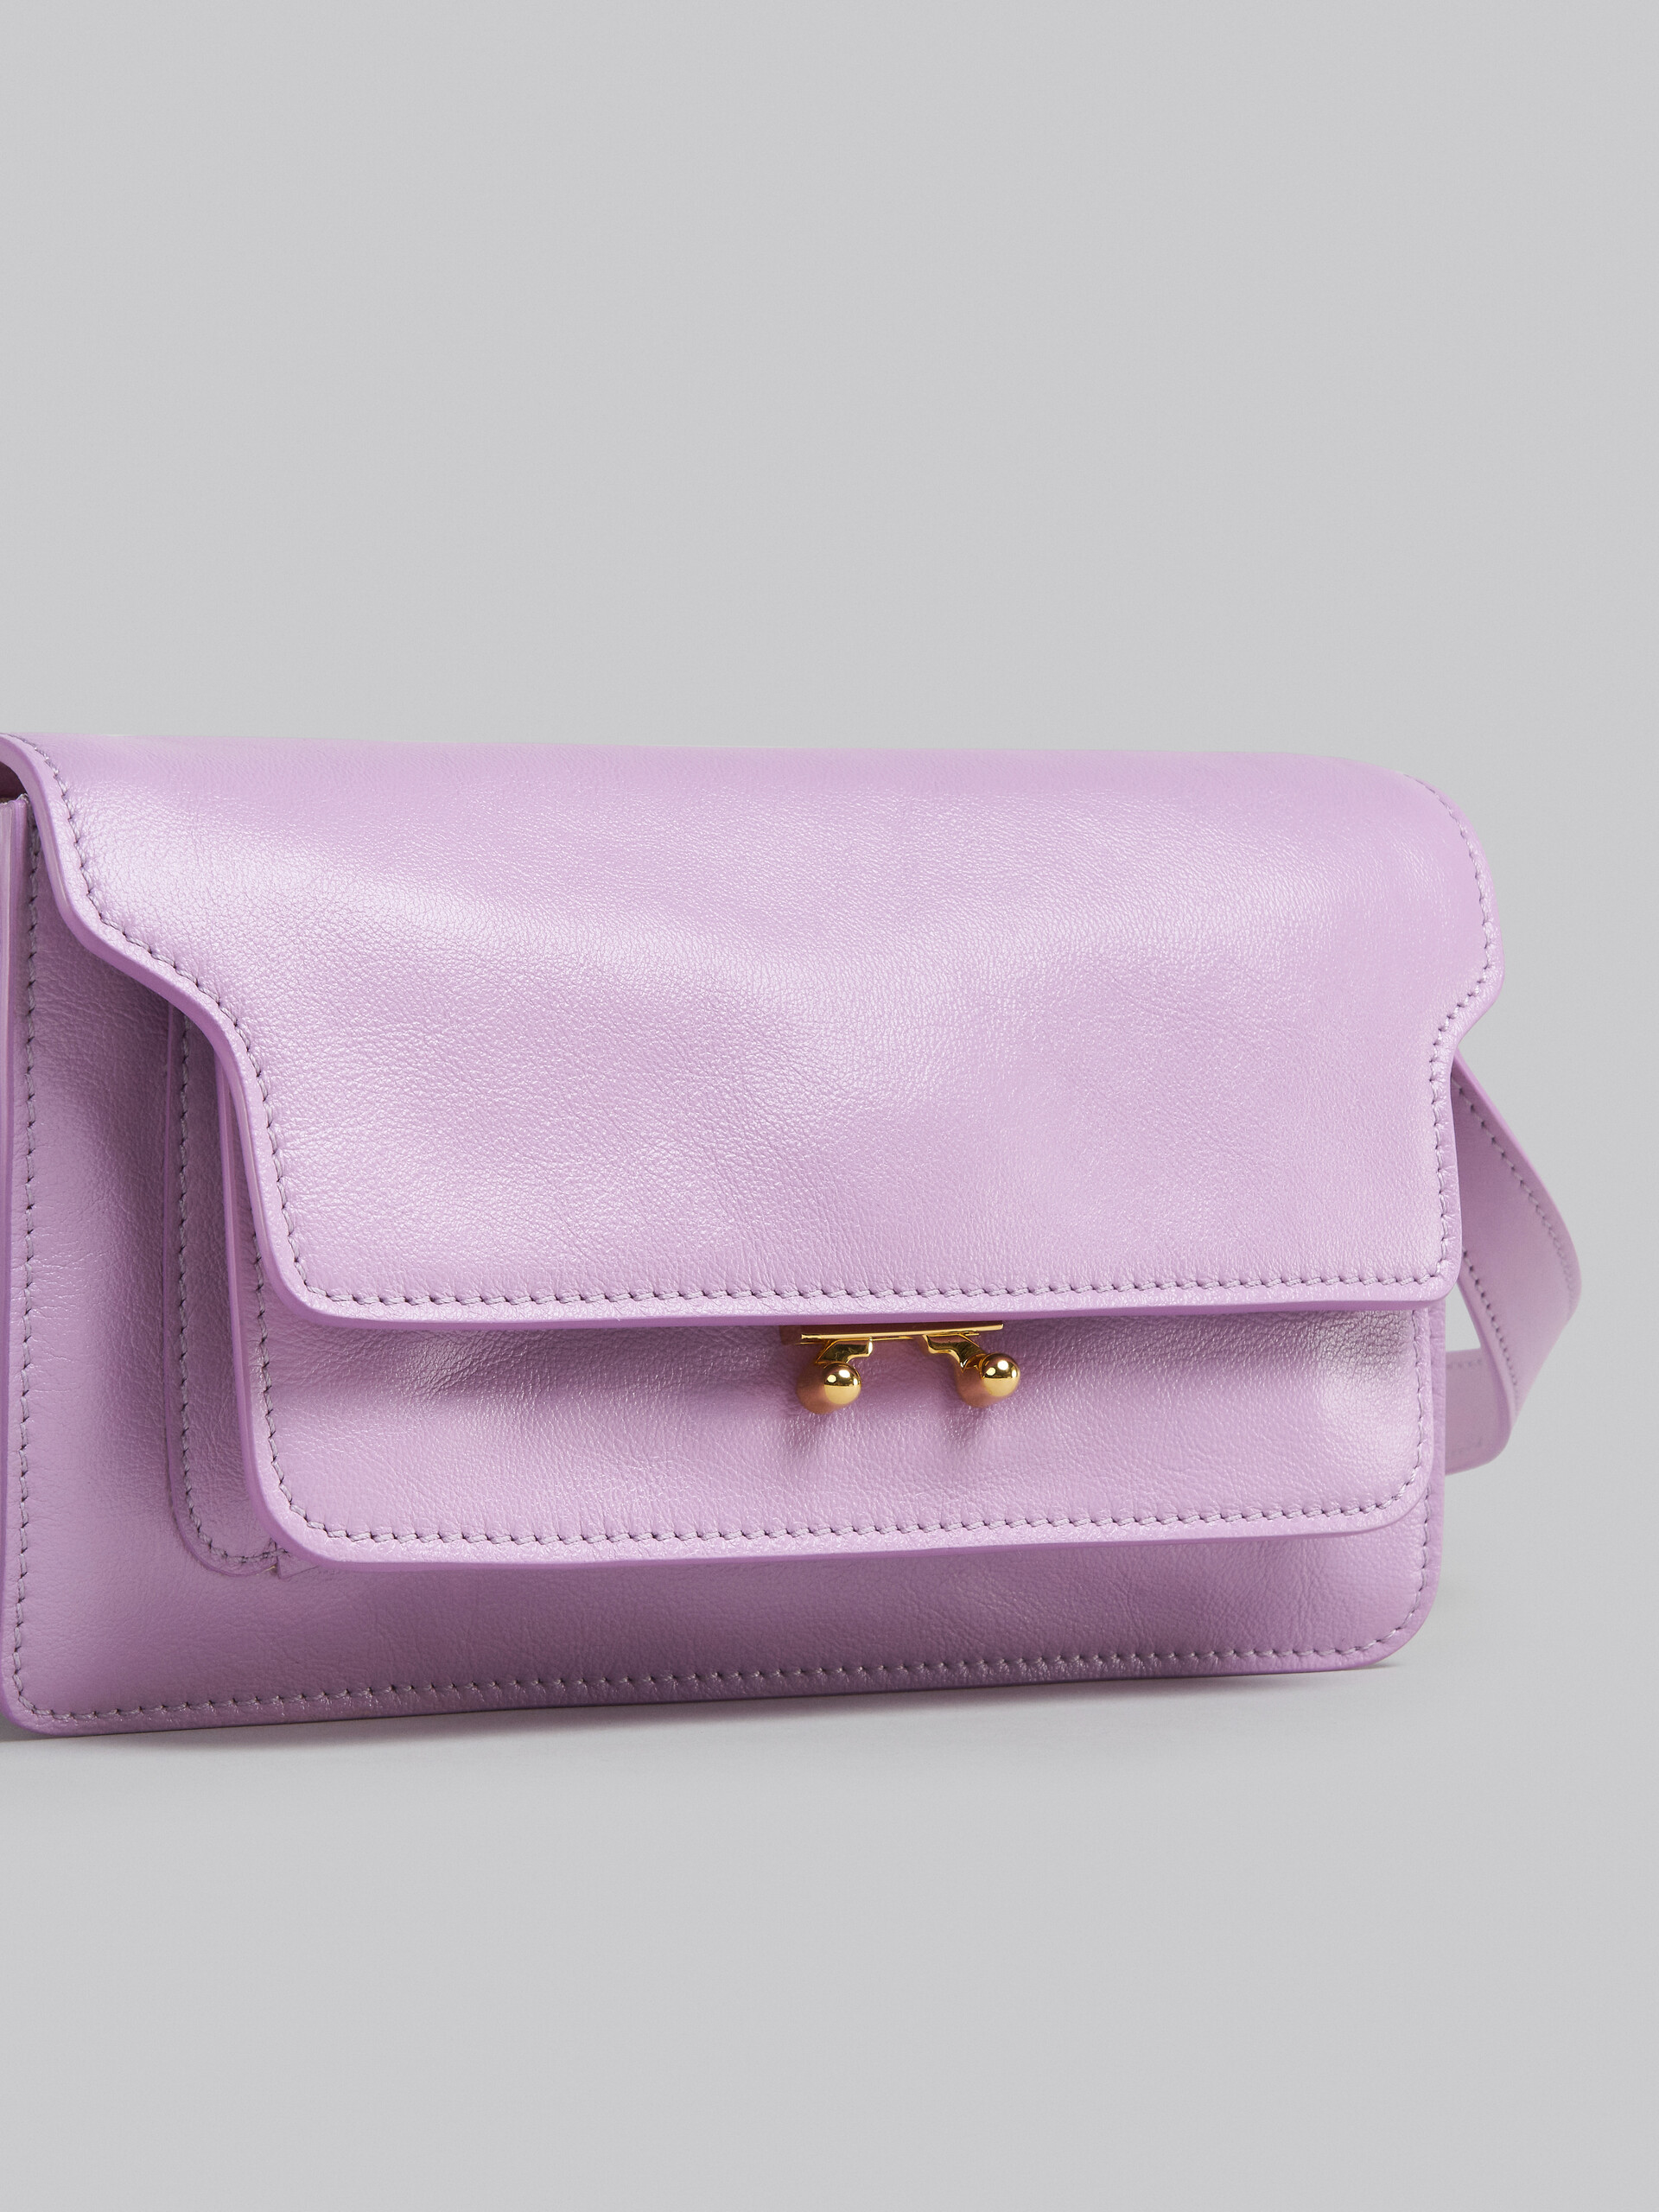 Trunk Soft Bag E/W in lilac leather - Shoulder Bags - Image 5